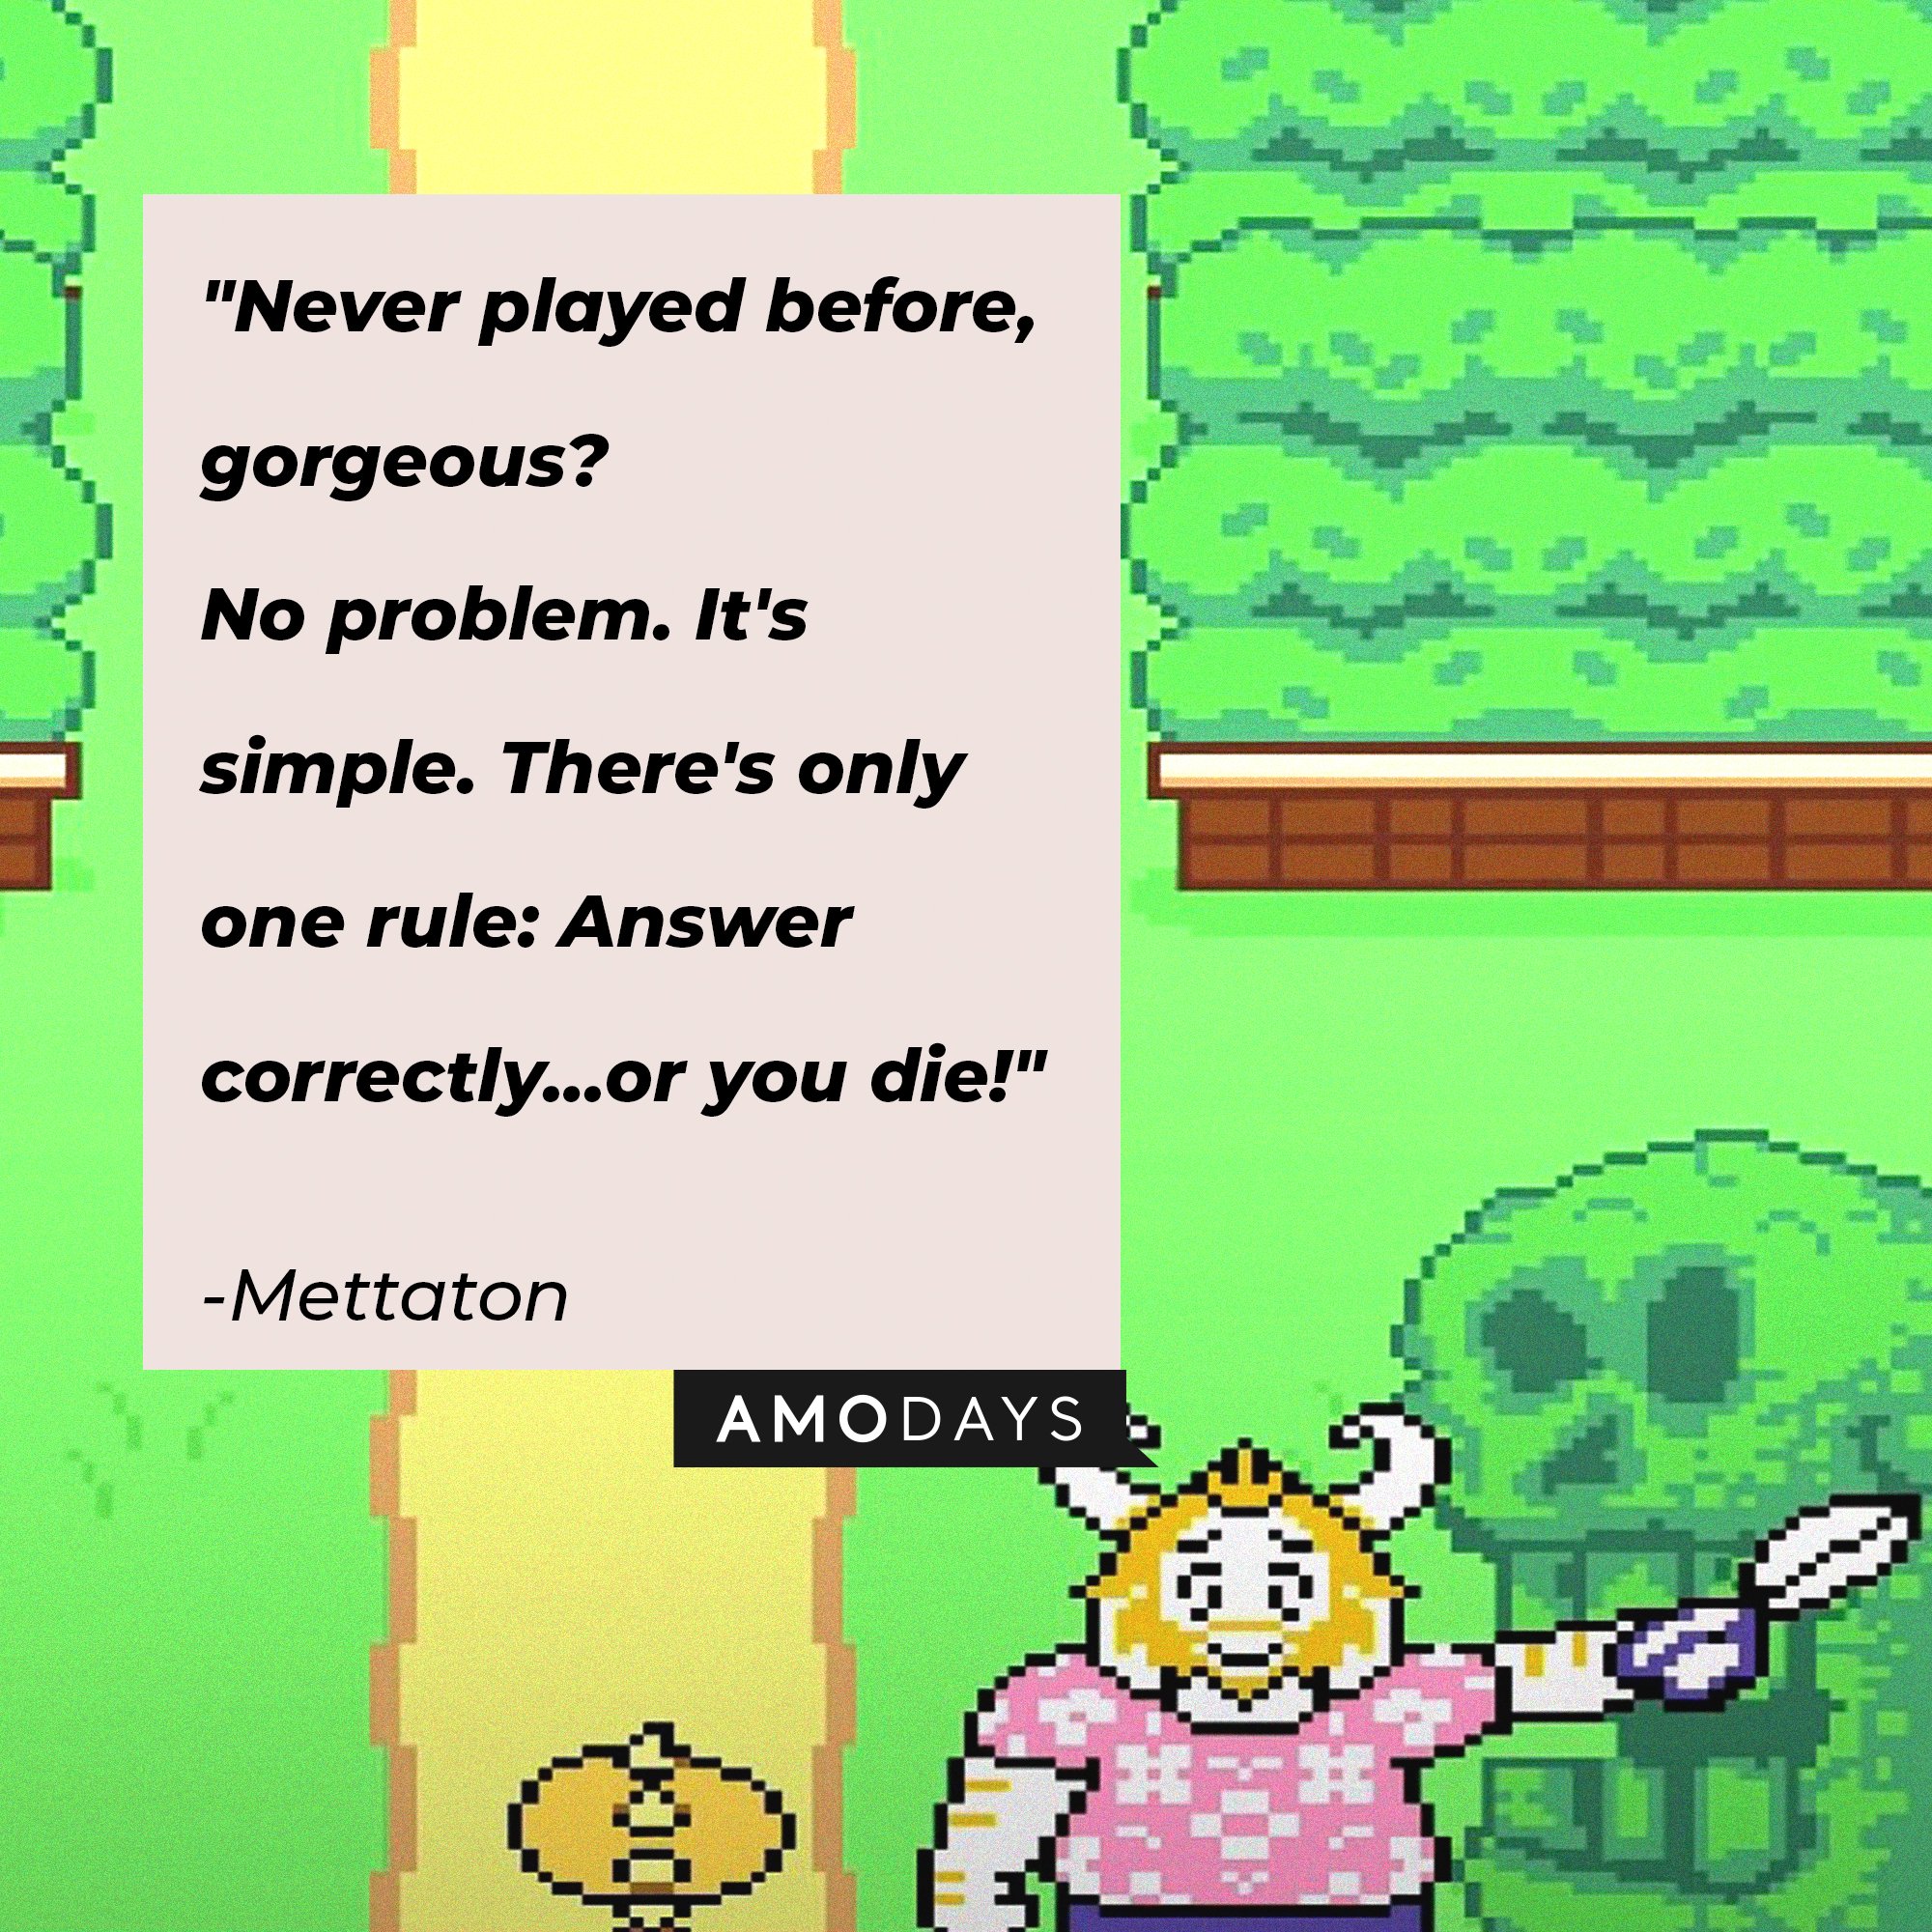 Mettatons’ quote: "Never played before, gorgeous? No problem. It's simple. There's only one rule: Answer correctly…or you die!" | Image: AmoDays